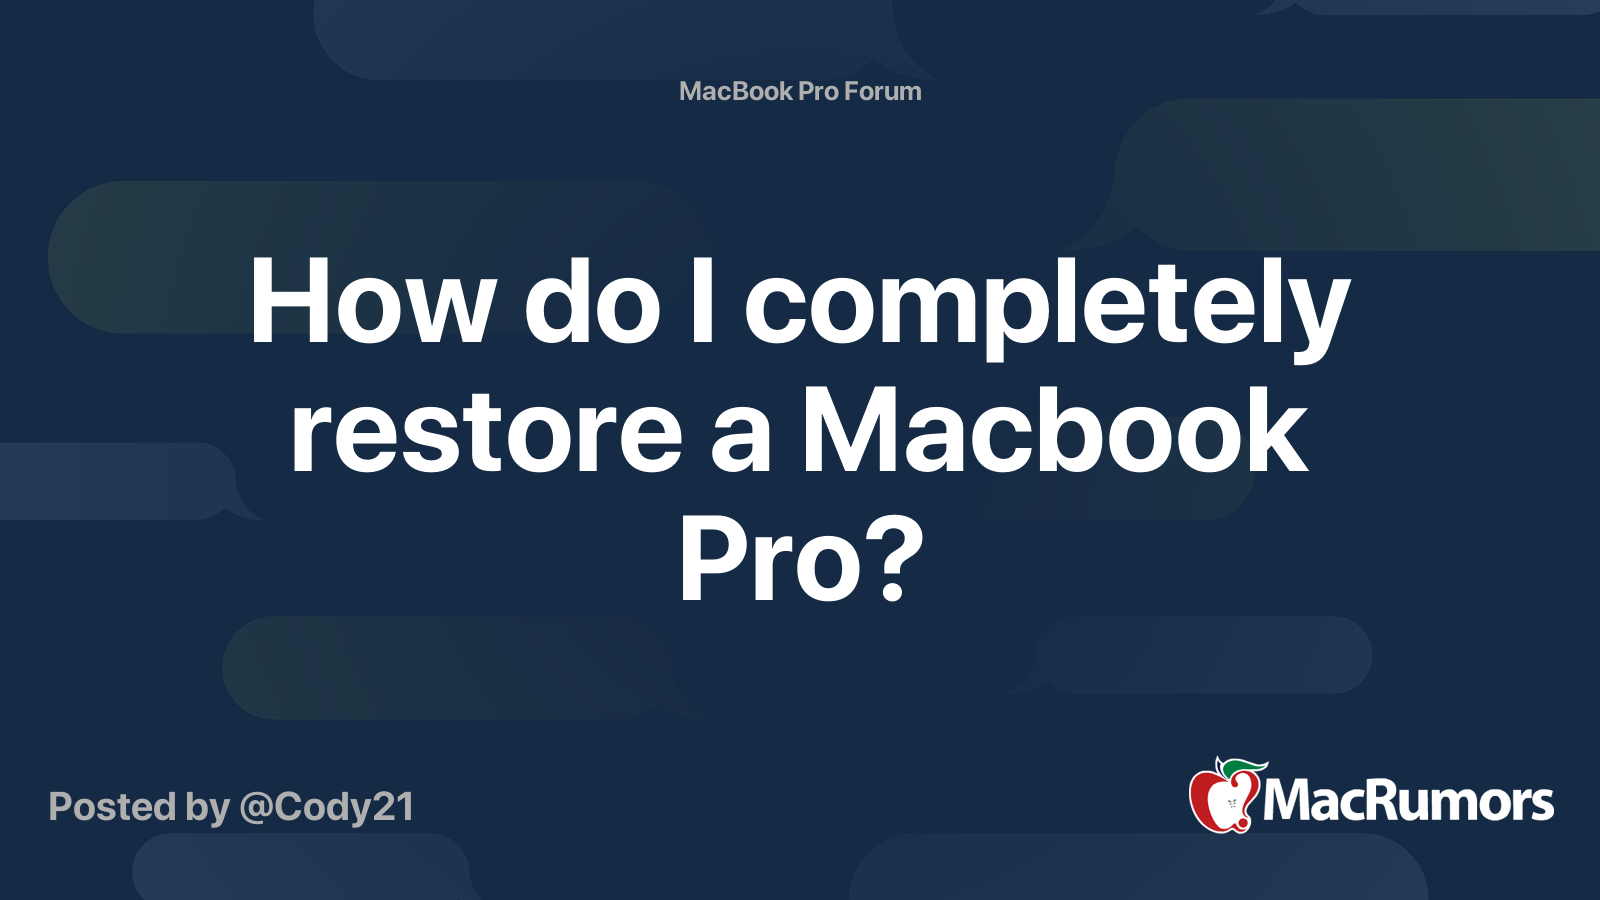 How do I completely restore a Macbook Pro? | MacRumors Forums